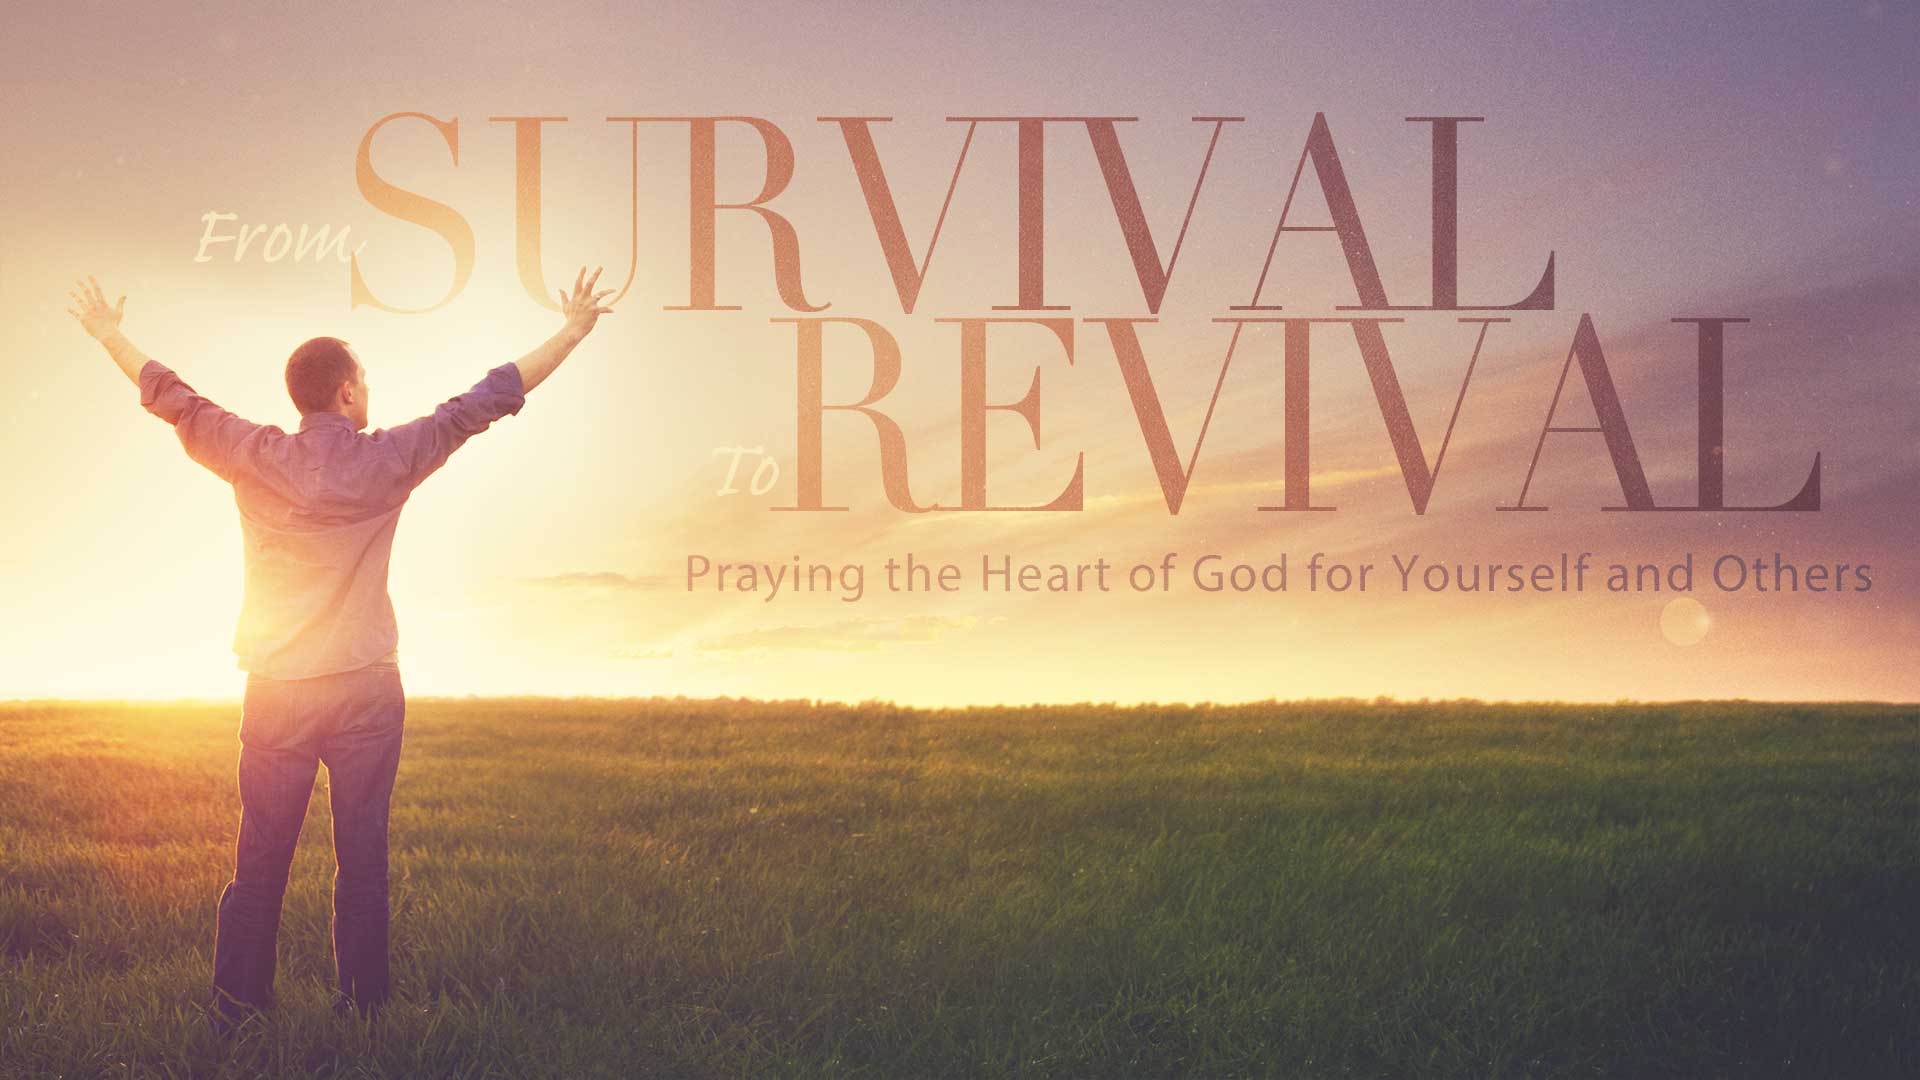 From Survival To Revival: Week 2 Image